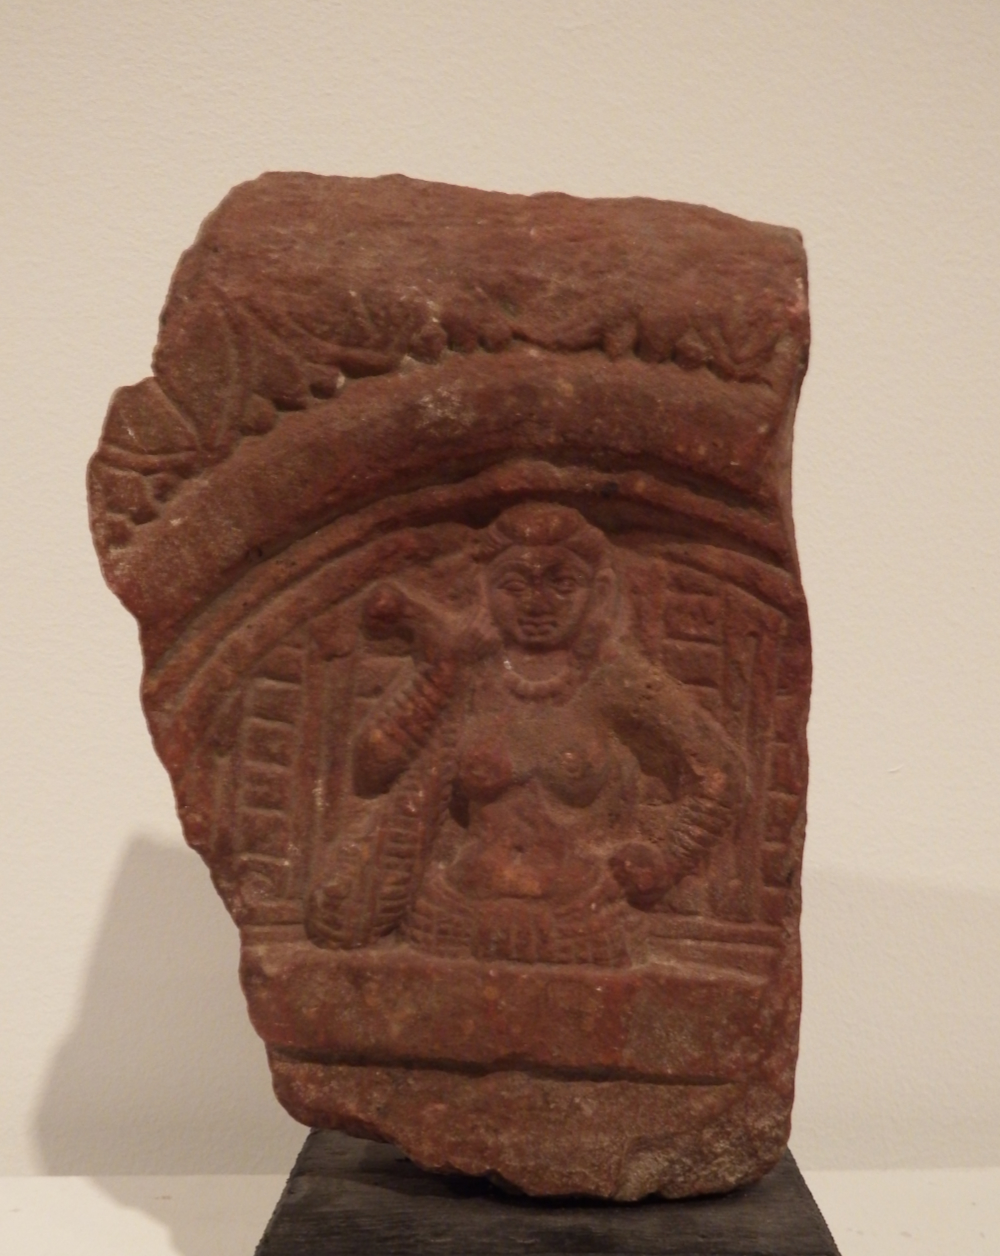 thumbnail of Yakshi Figure from Mathura region. medium: Red sandstone. date: 2nd century A.D.